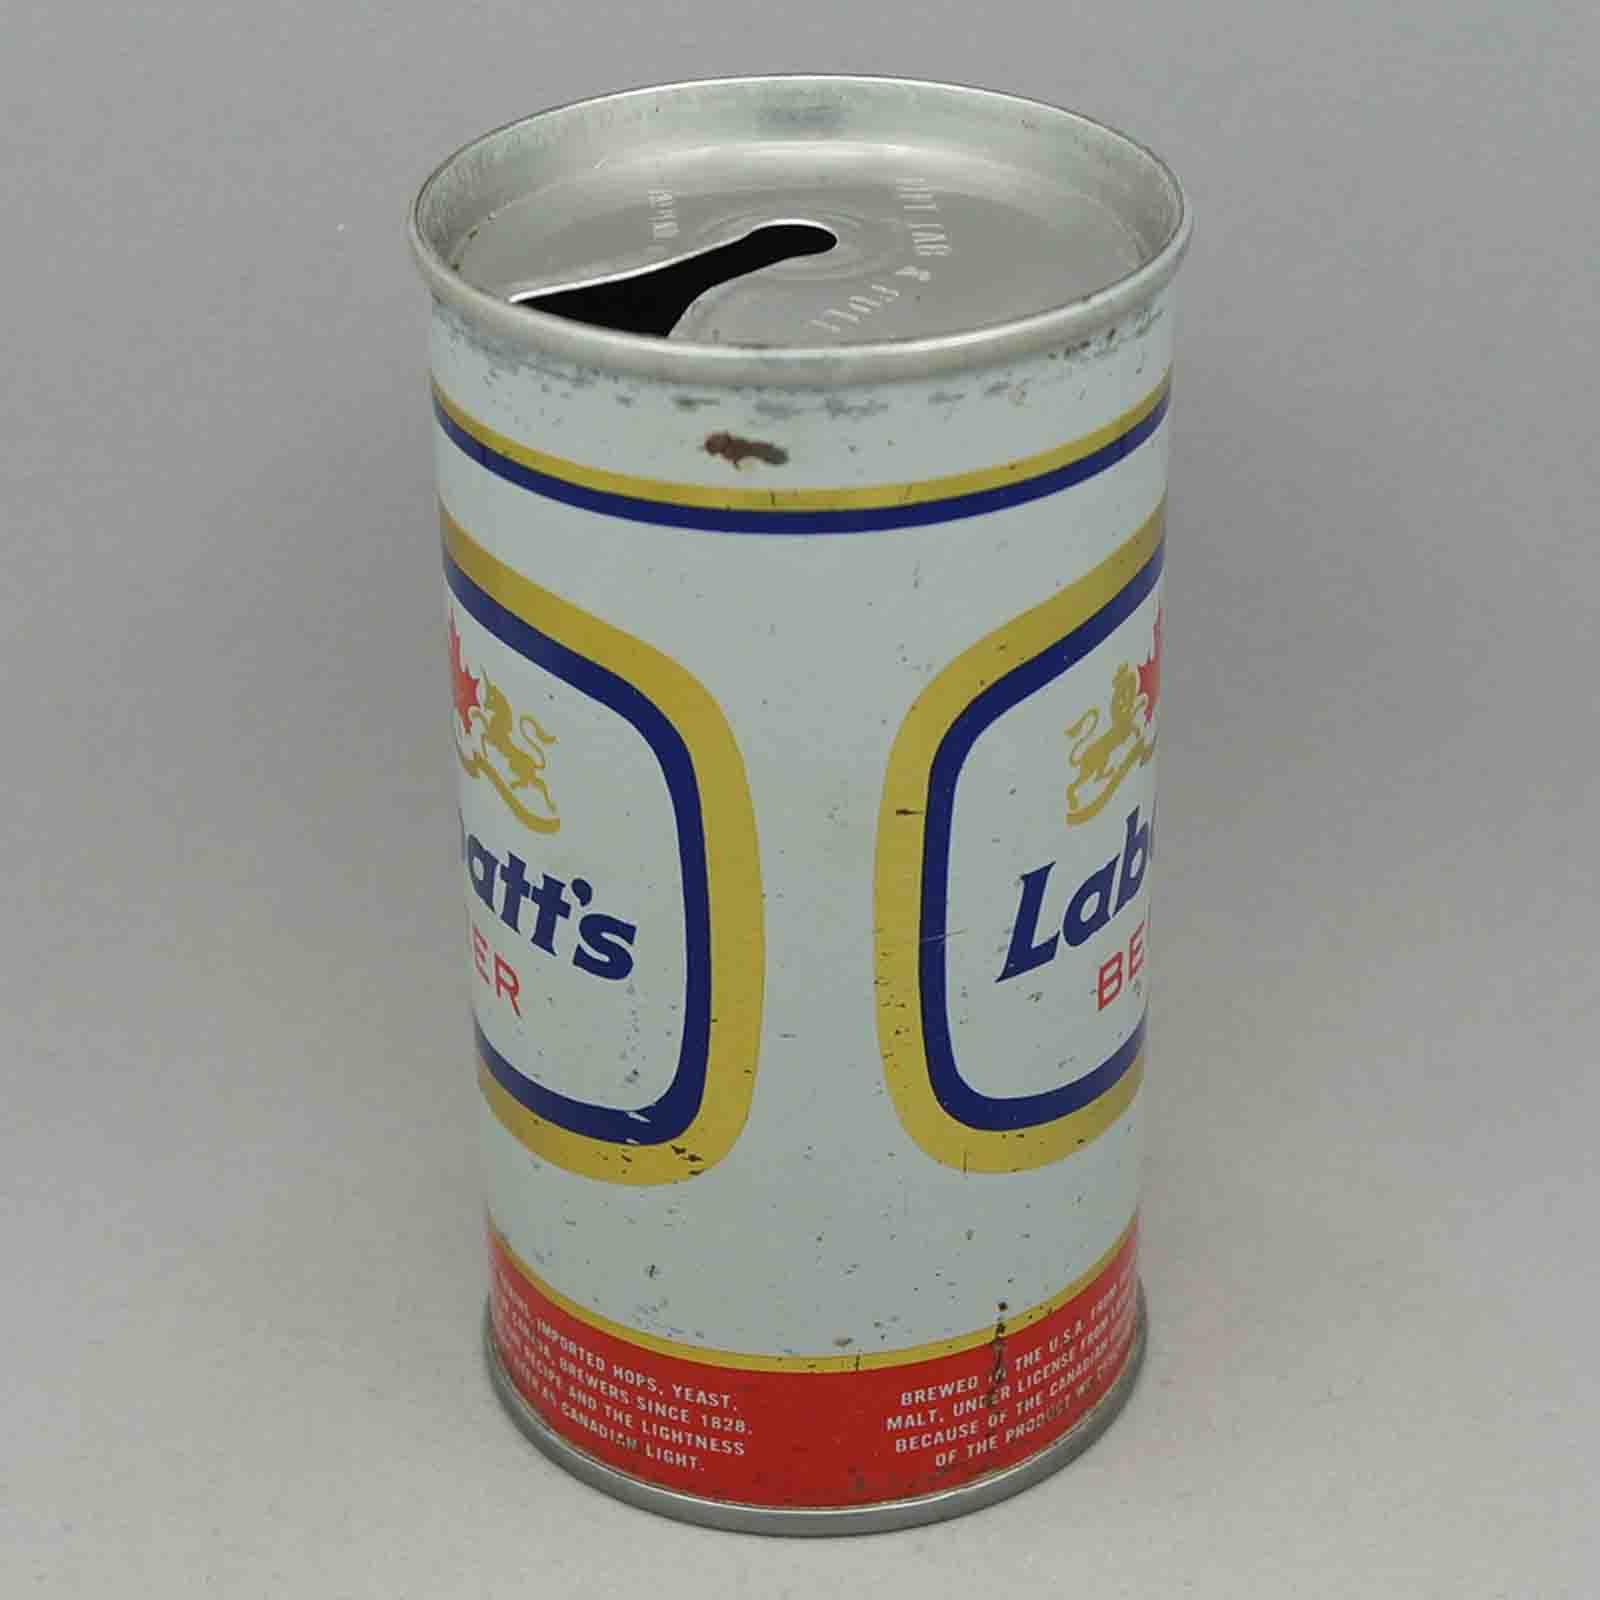 labatts 87-3 pull tab beer can 2